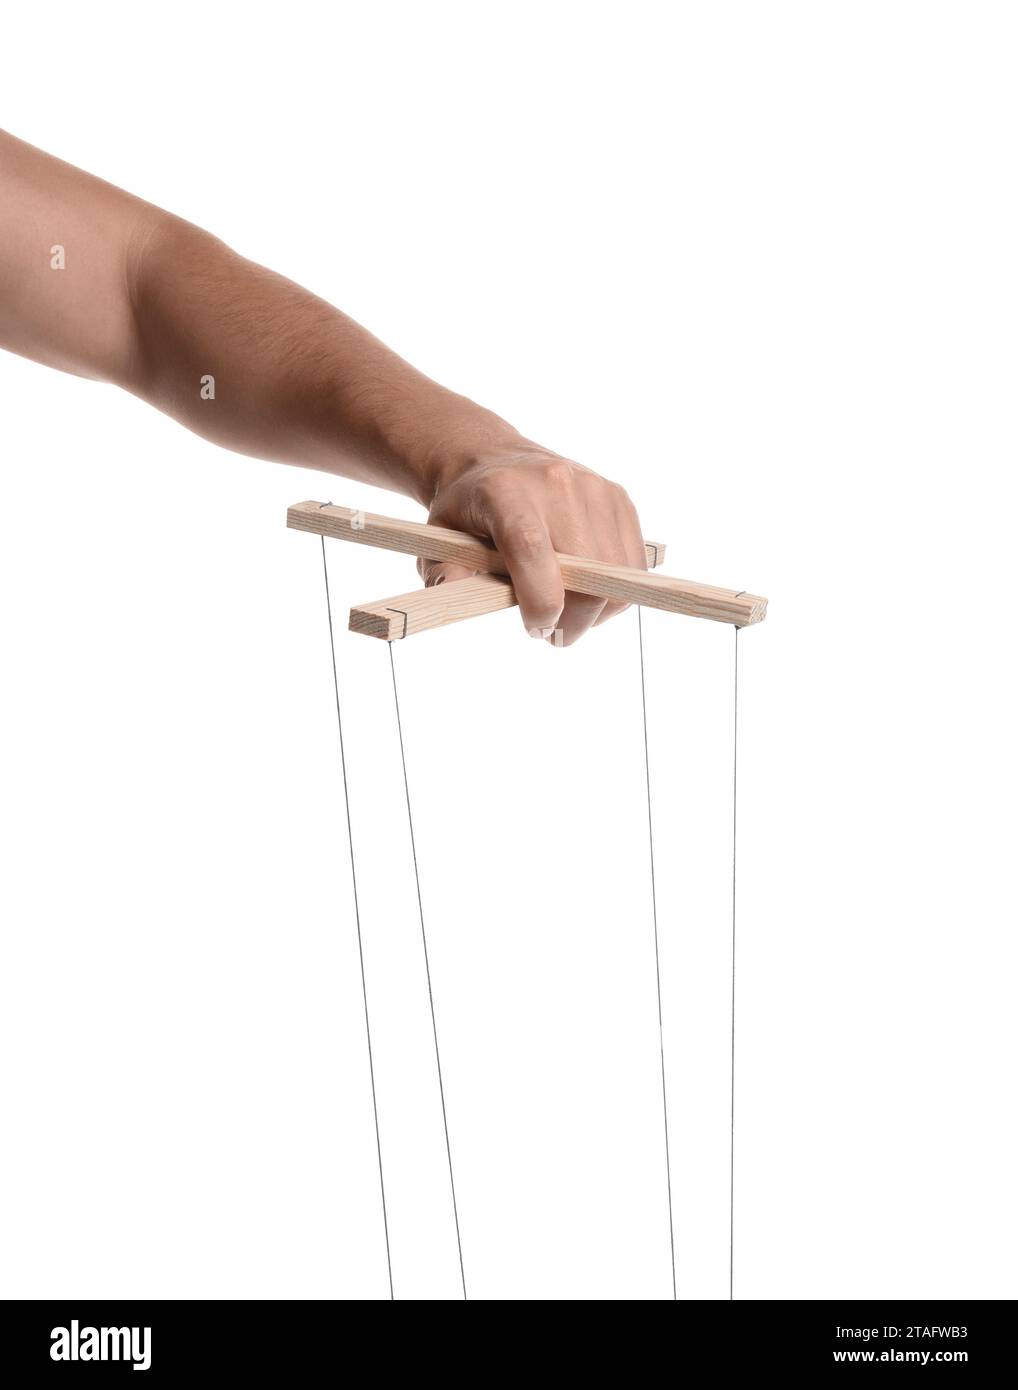 Man holding puppet control bar with strings on white background, closeup Stock Photo